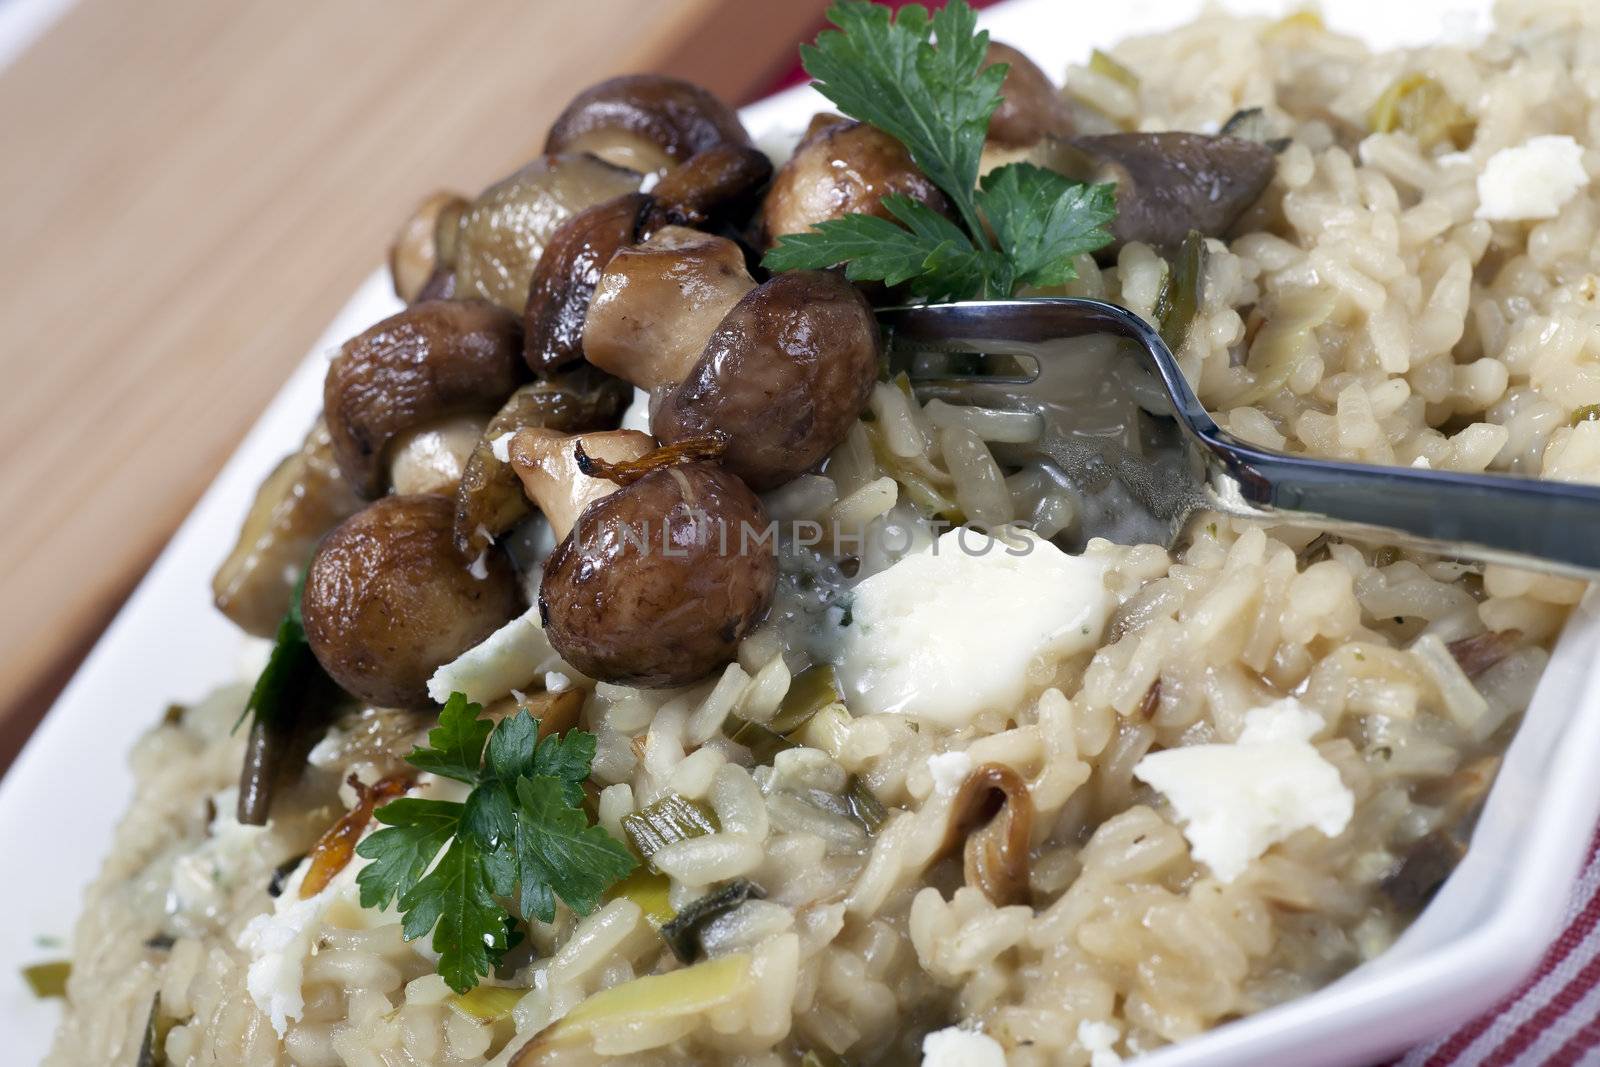 Mushrooms and Risotto by charlotteLake